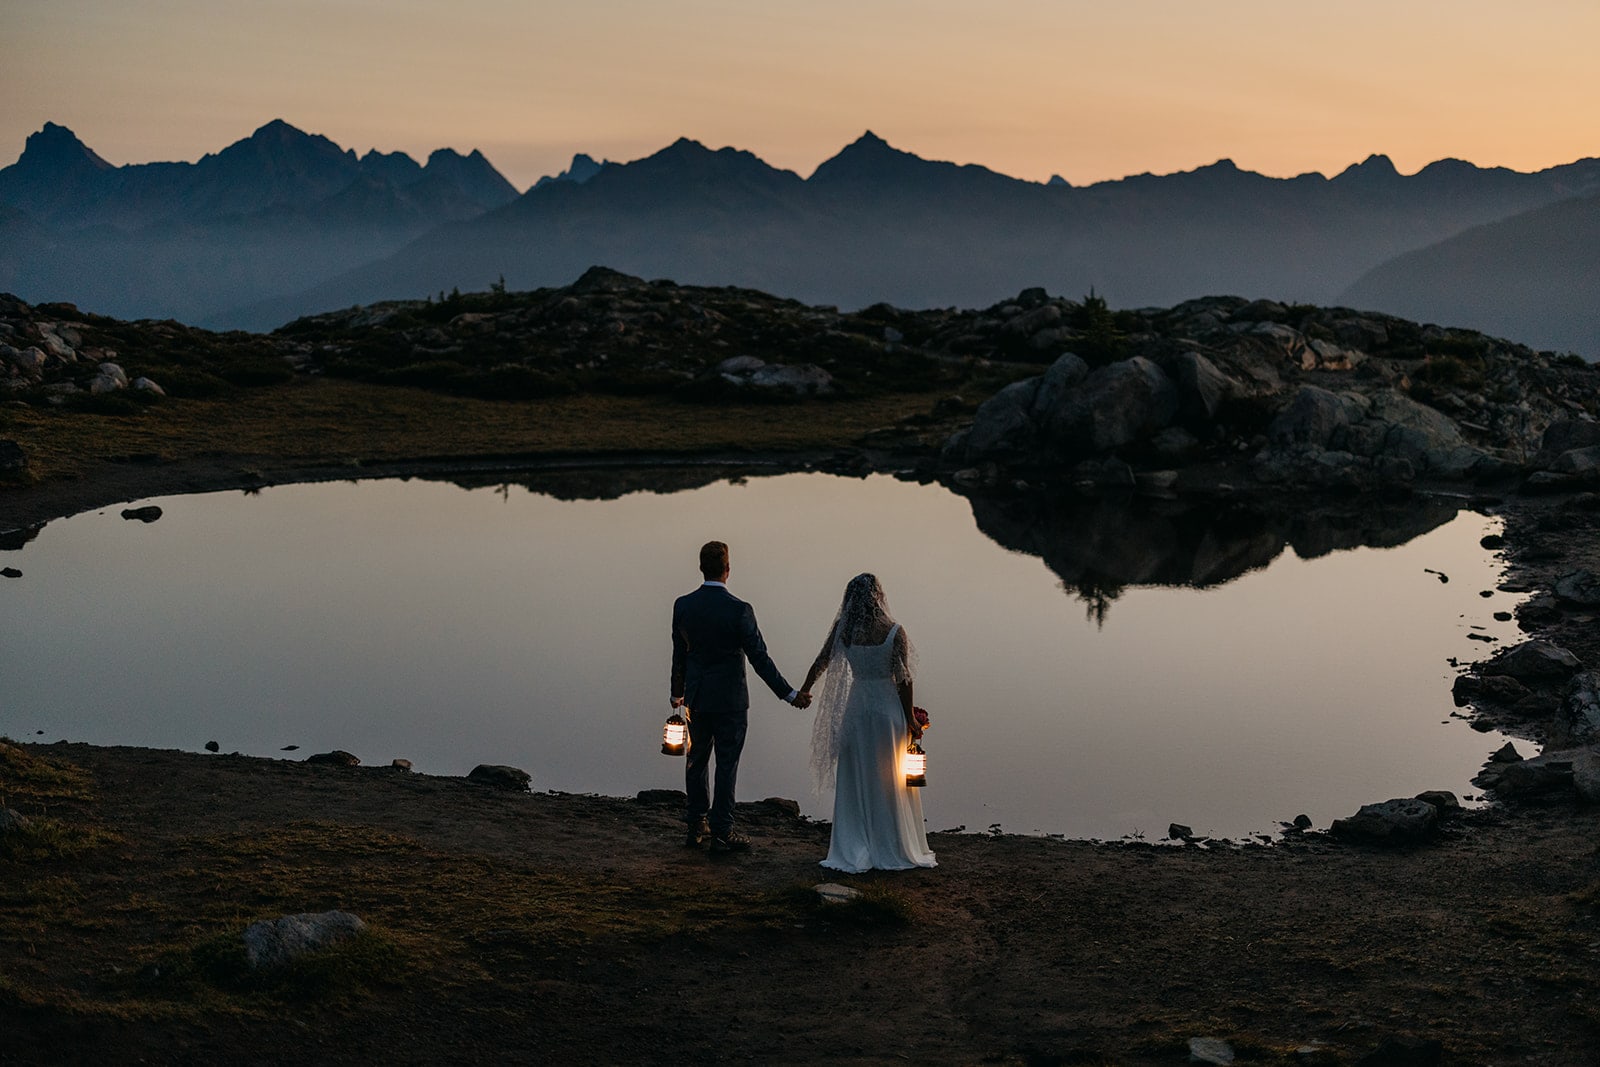 The couple stands at a lake before sunrise.